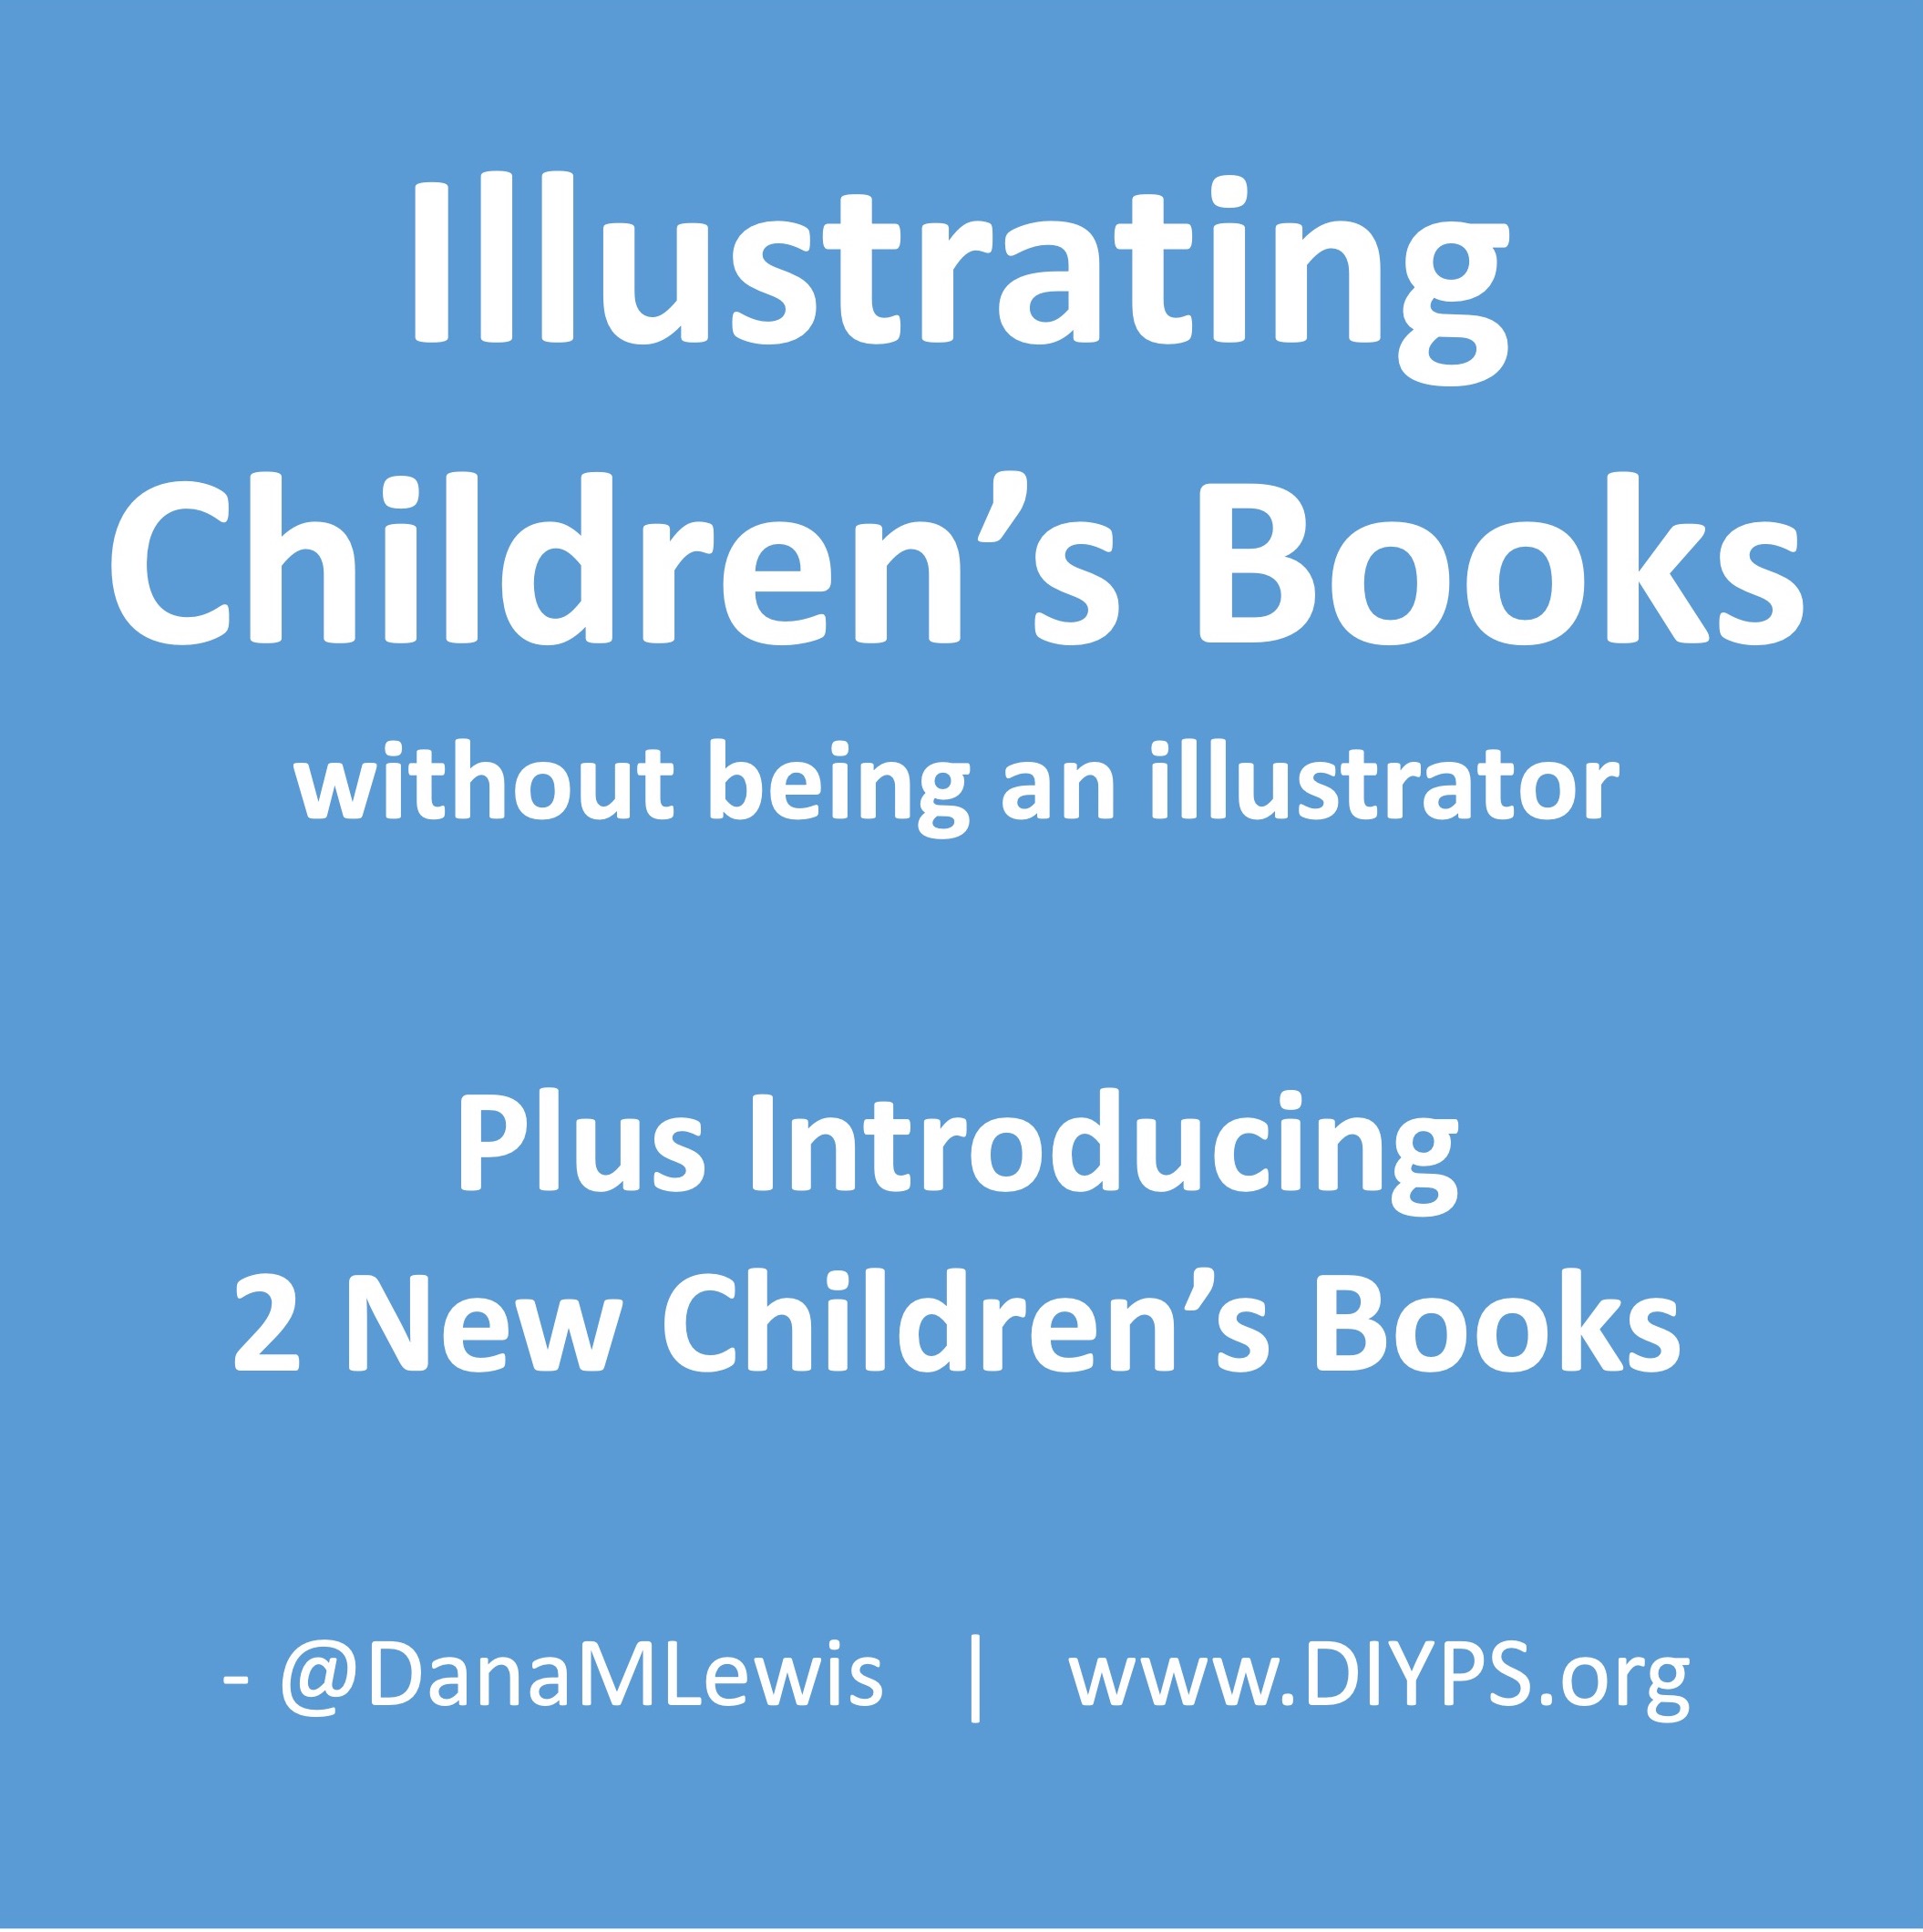 Illustrating Children's Books without being an illustrator, plus introducting two new children's books by Dana M. Lewis